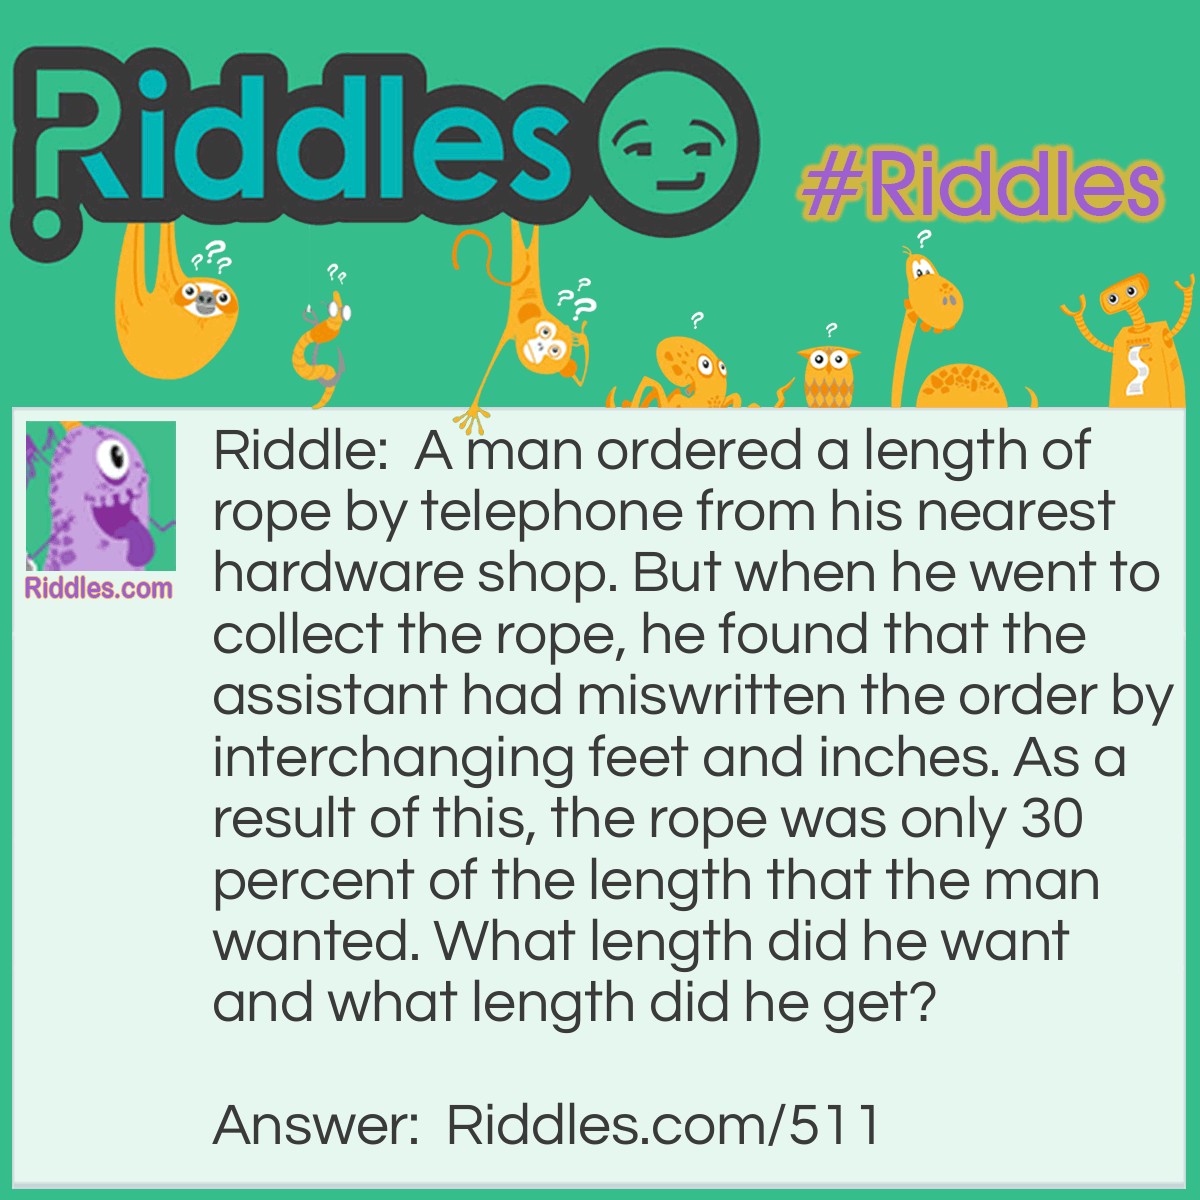 Riddle: A man ordered a length of rope by telephone from his nearest hardware shop. But when he went to collect the rope, he found that the assistant had miswritten the order by interchanging feet and inches. As a result of this, the rope was only 30 percent of the length that the man wanted. What length did he want and what length did he get? Answer: The man ordered 9 feet 2 inches of rope, and got 2 feet 9 inches.